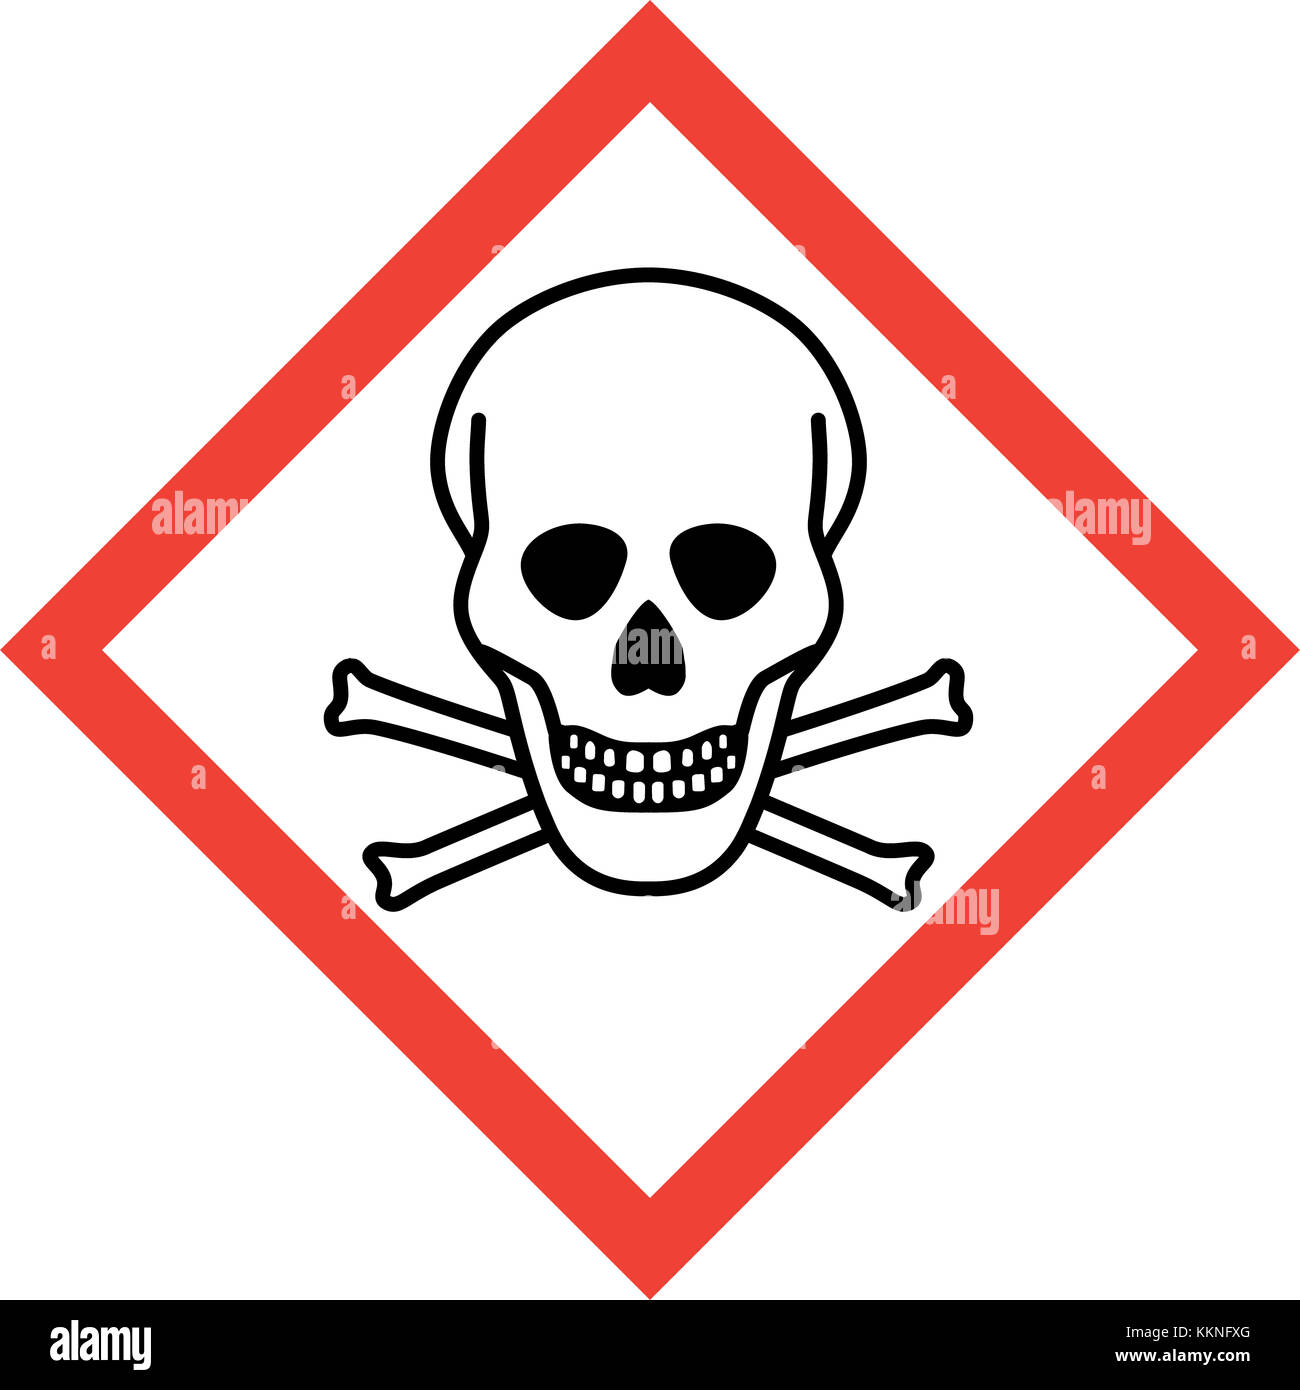 Hazard sign  with deadly danger  symbol Stock Photo Alamy